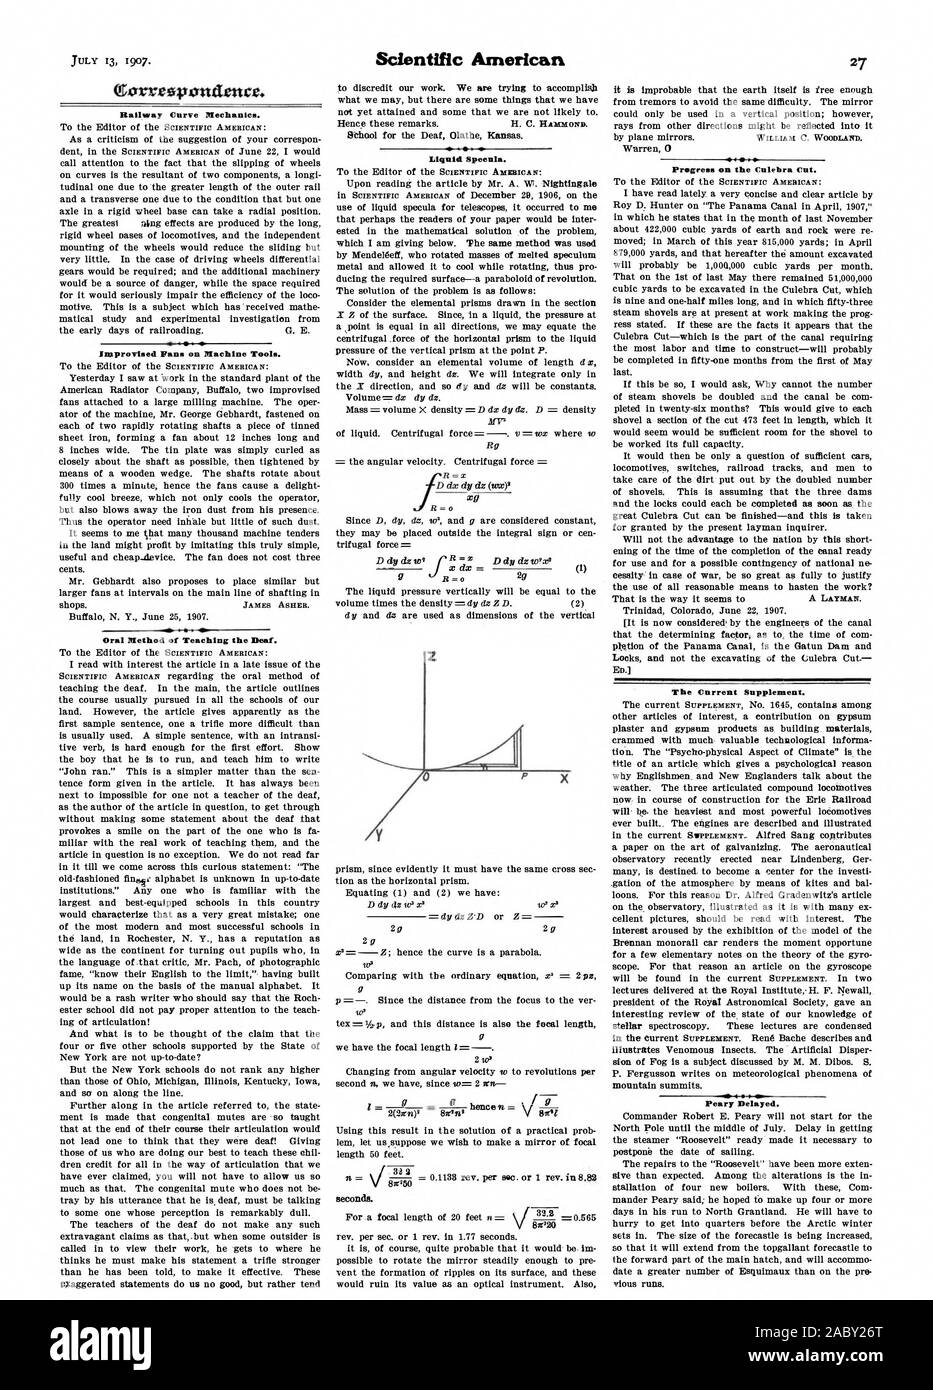 Railway Curve Mechanics. Intaprovised Fans on Machine Tools. Oral Method of Teaching the Deaf. Liquid Specula. x dx  Progress on the Culebra Cut. The Current Supplement. Peary Delayed., scientific american, 1907-07-13 Stock Photo